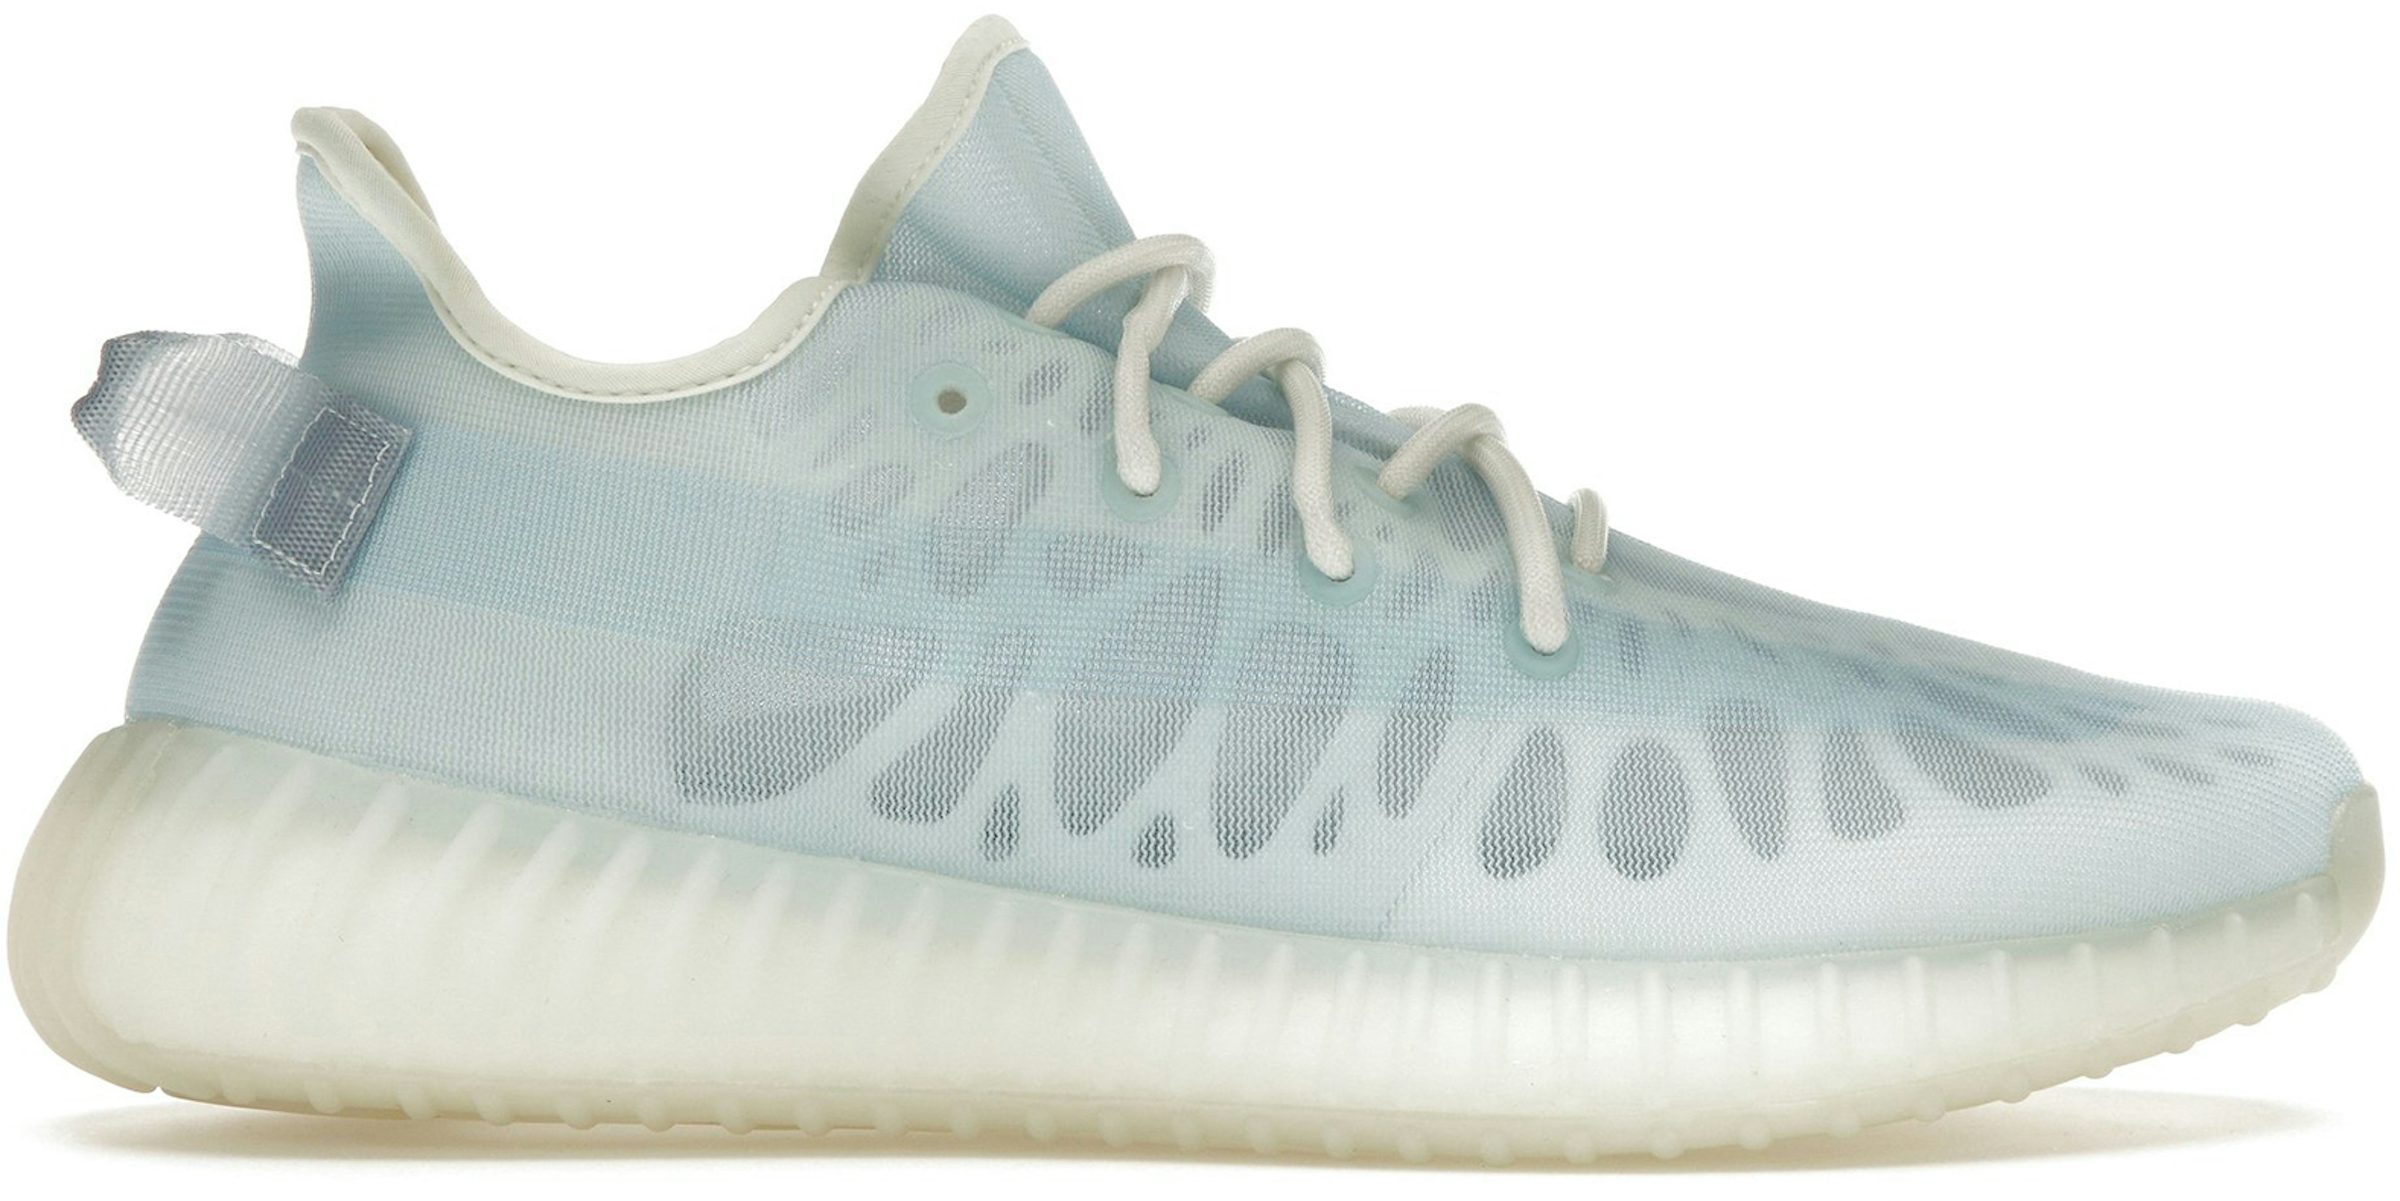 https://images.stockx.com/images/adidas-Yeezy-Boost-350-V2-Mono-Ice-Product.jpg?fit=fill&bg=FFFFFF&w=1200&h=857&fm=jpg&auto=compress&dpr=2&trim=color&updated_at=1704465580&q=60